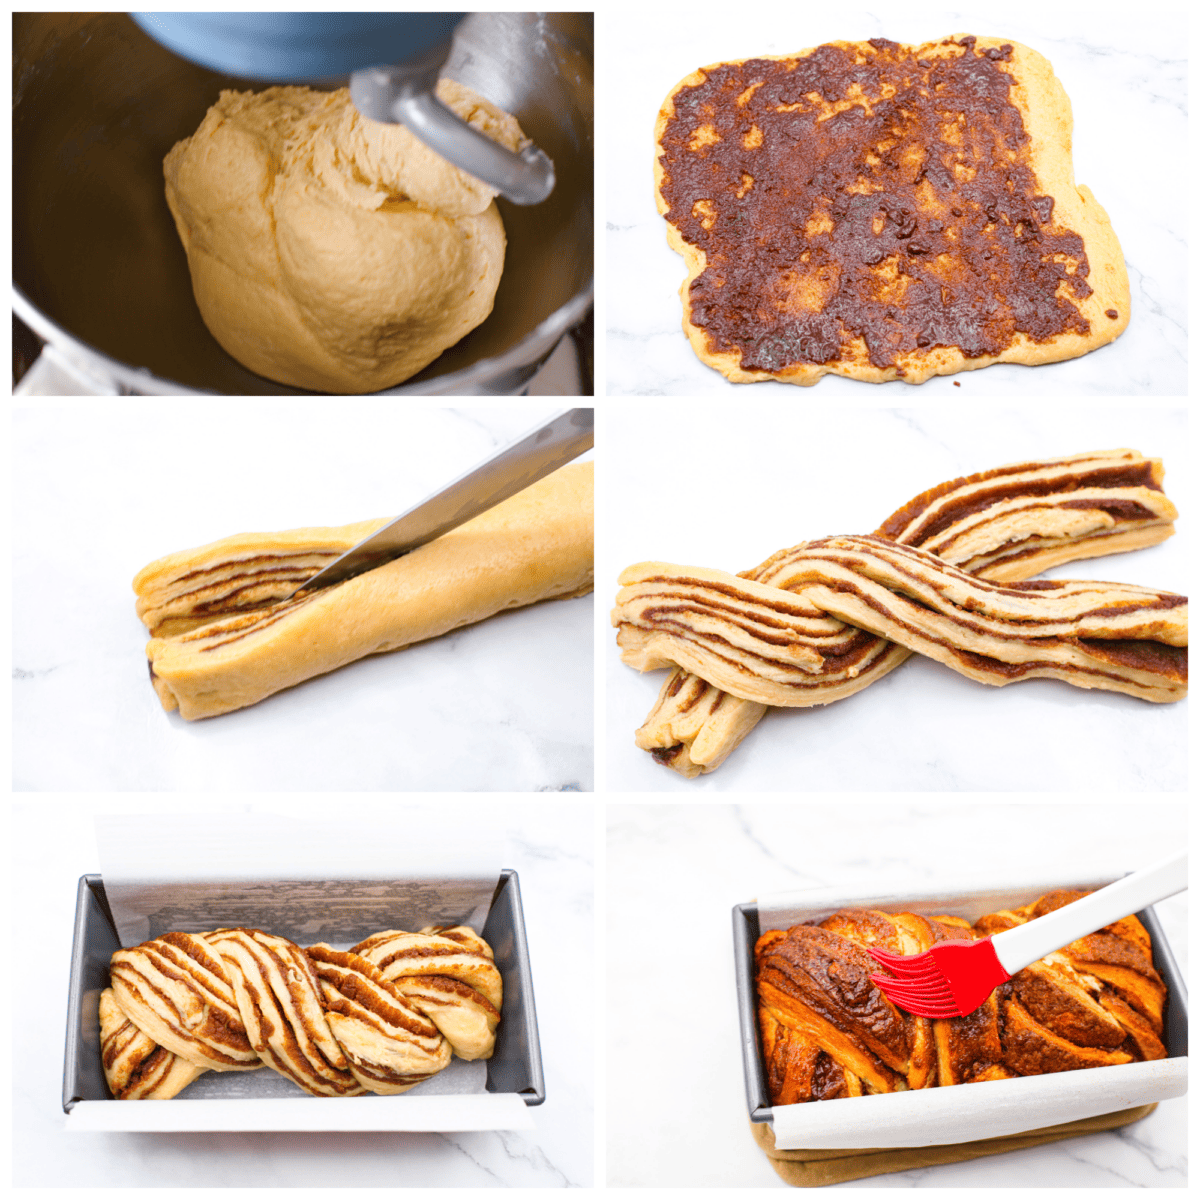 6 photos showing how to make the dough, twist it and add the filling.